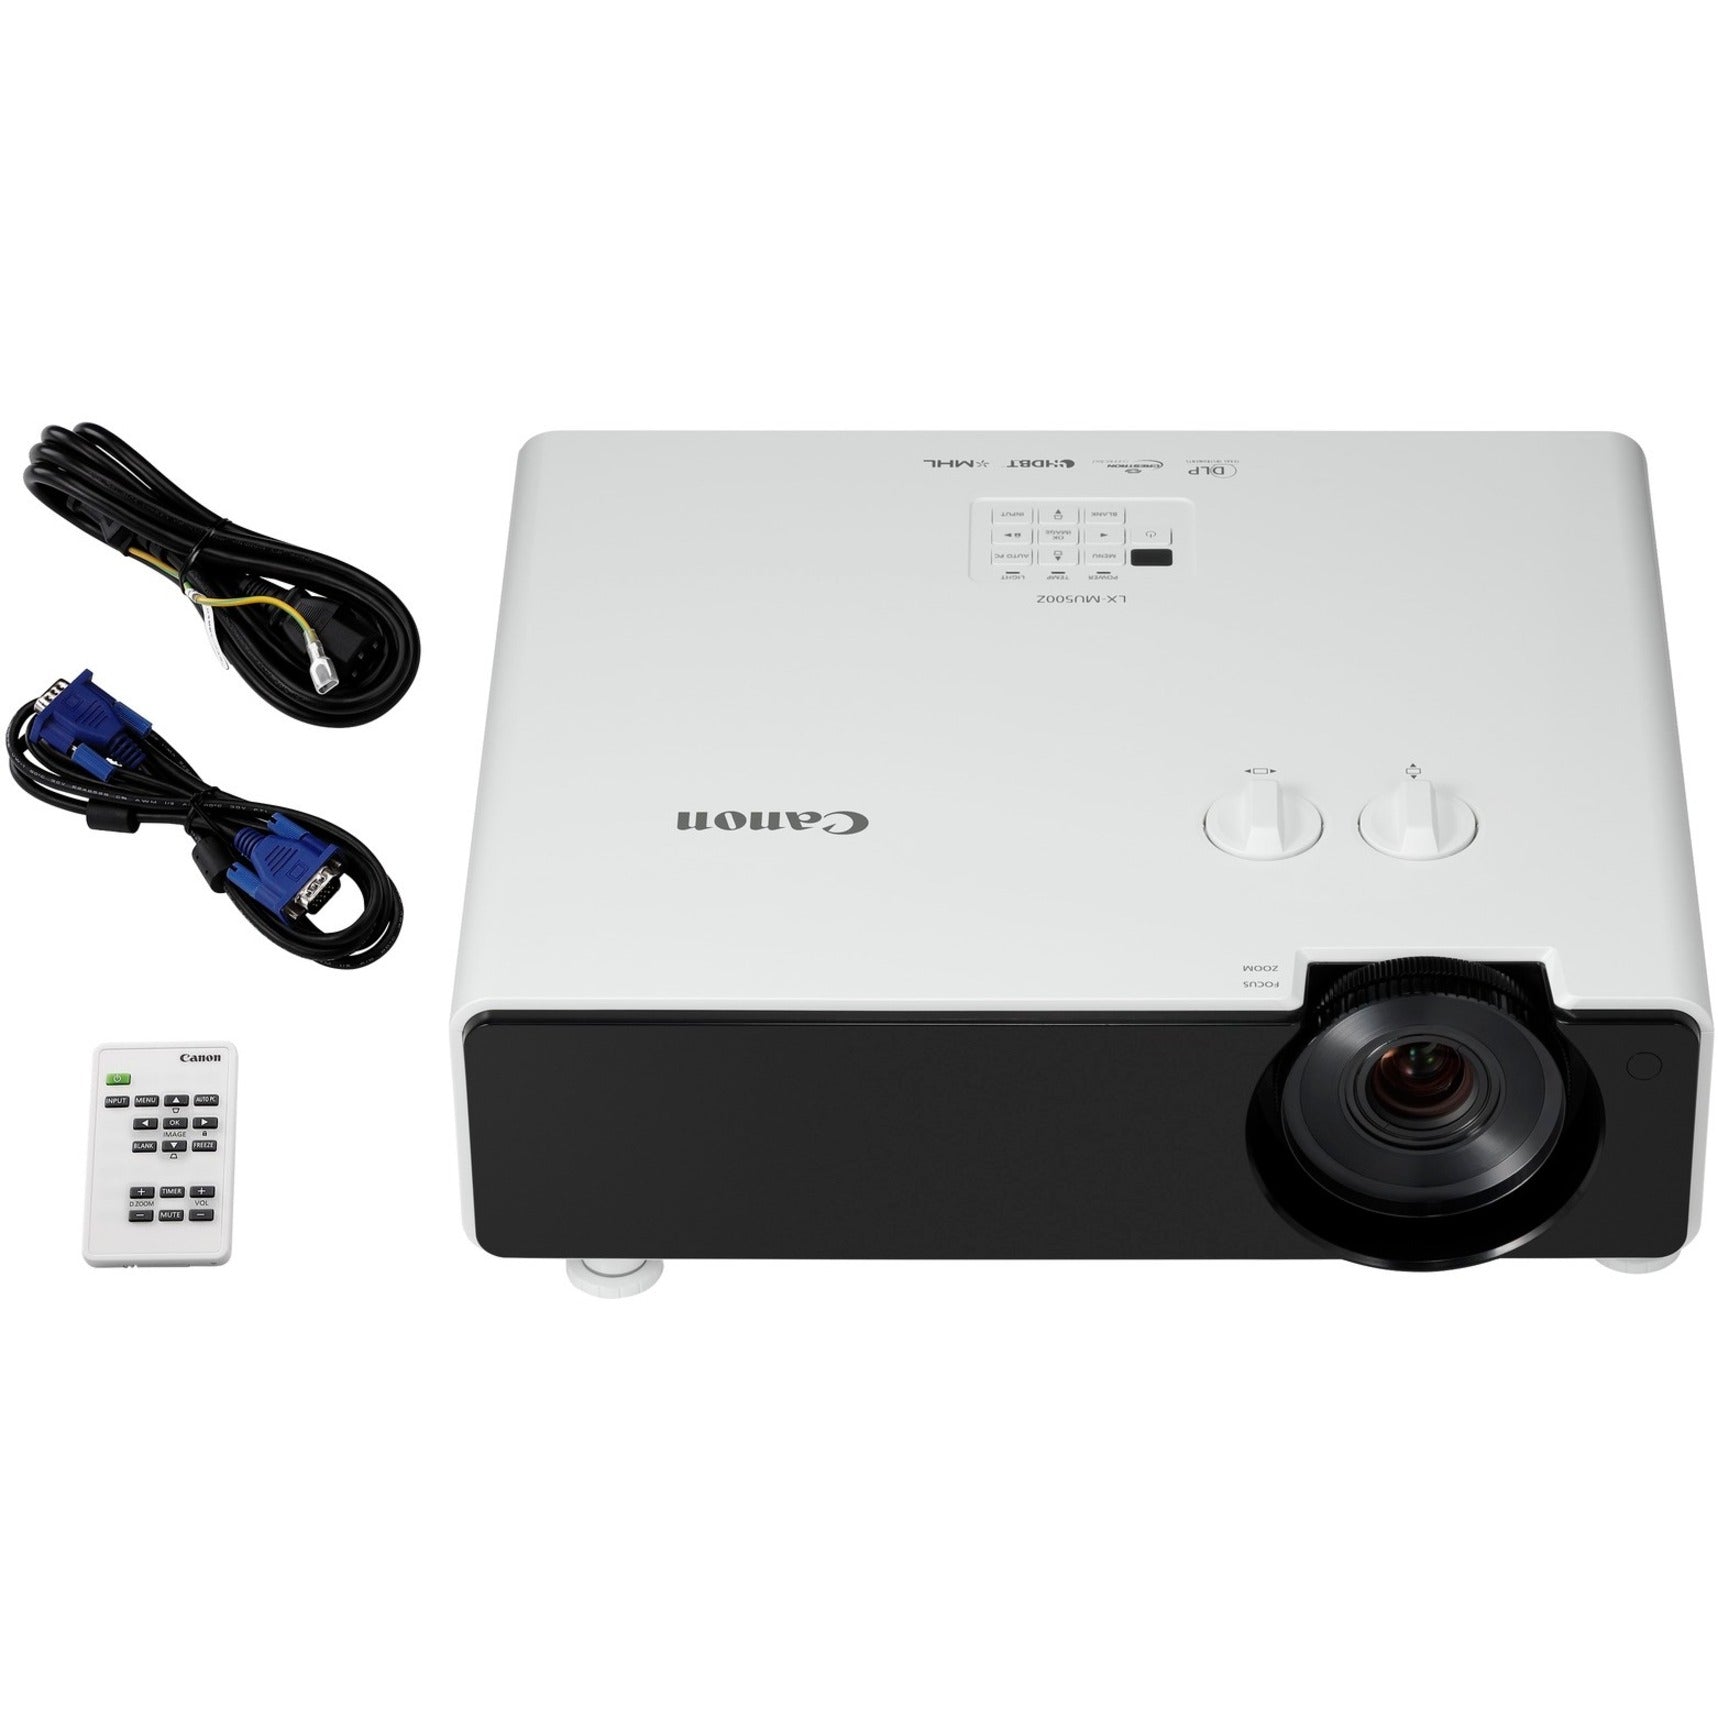 ProBeam 4K (3,840x2,160) Laser Projector with 5,000 ANSI Lumens Brightness,  20,000 hrs. life, 12 Point Warping, & Wireless Connection